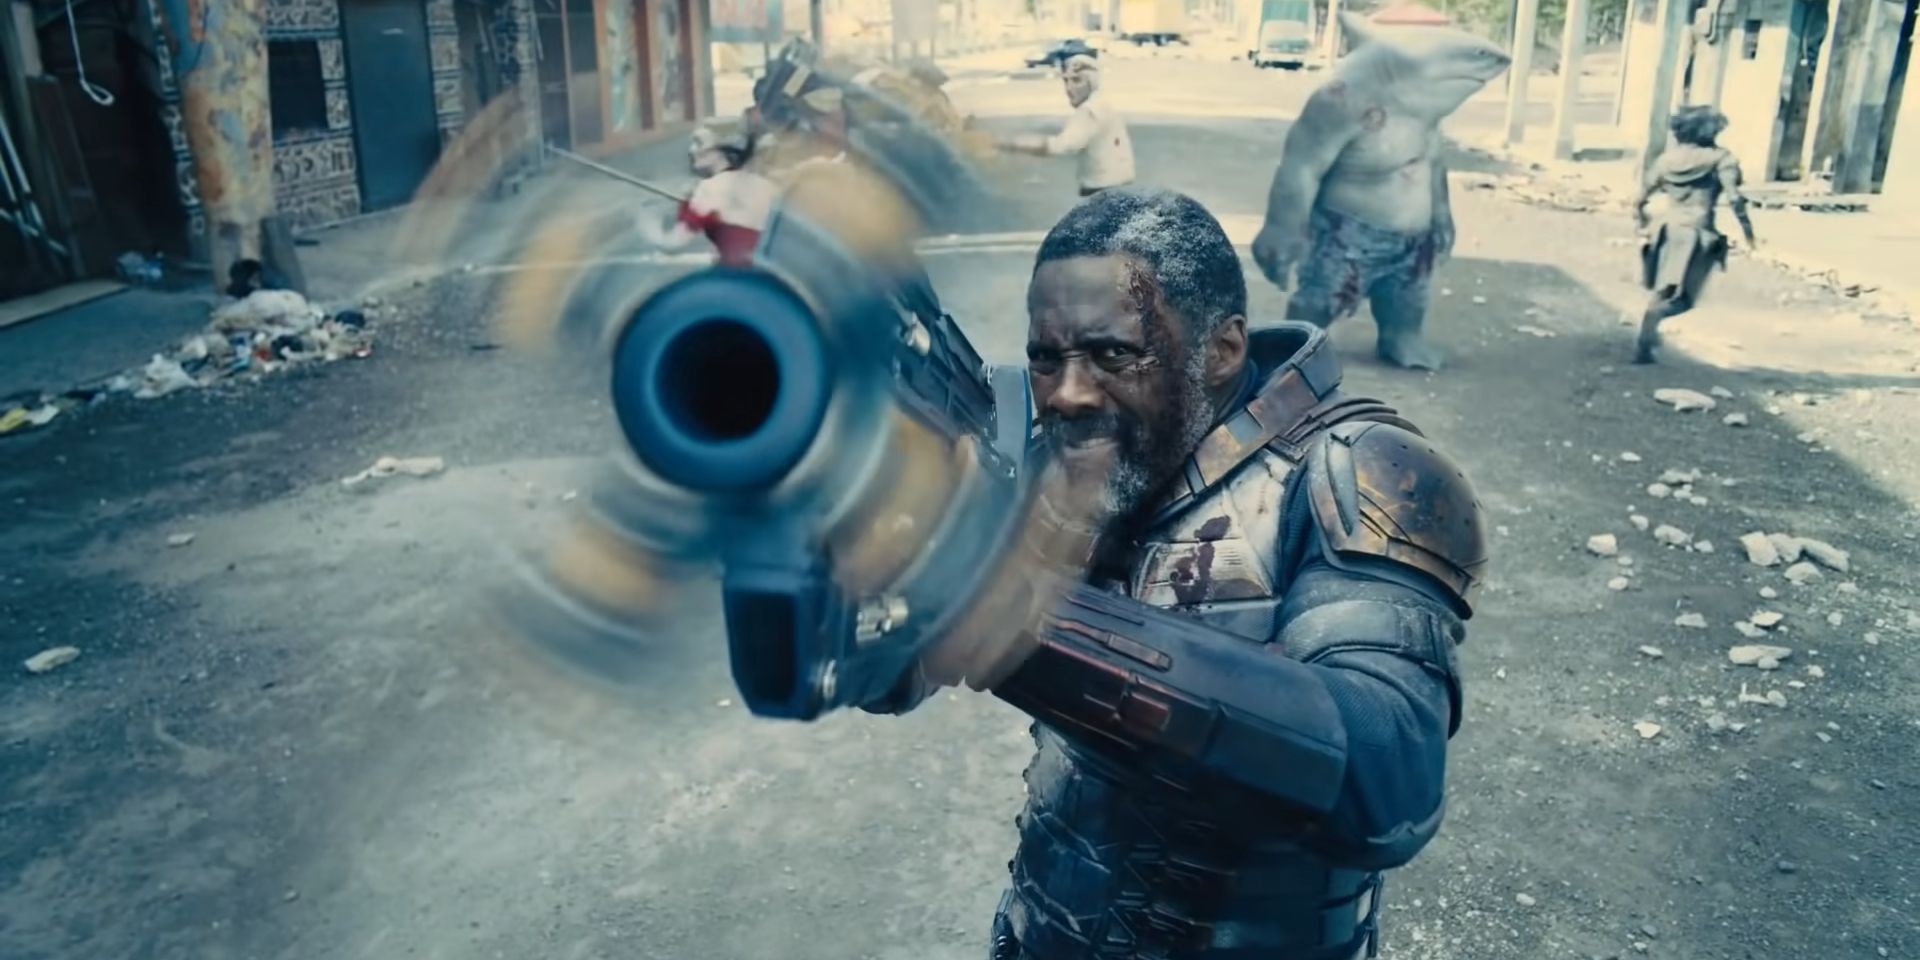 Bloodsport firing his blaster in The Suicide Squad